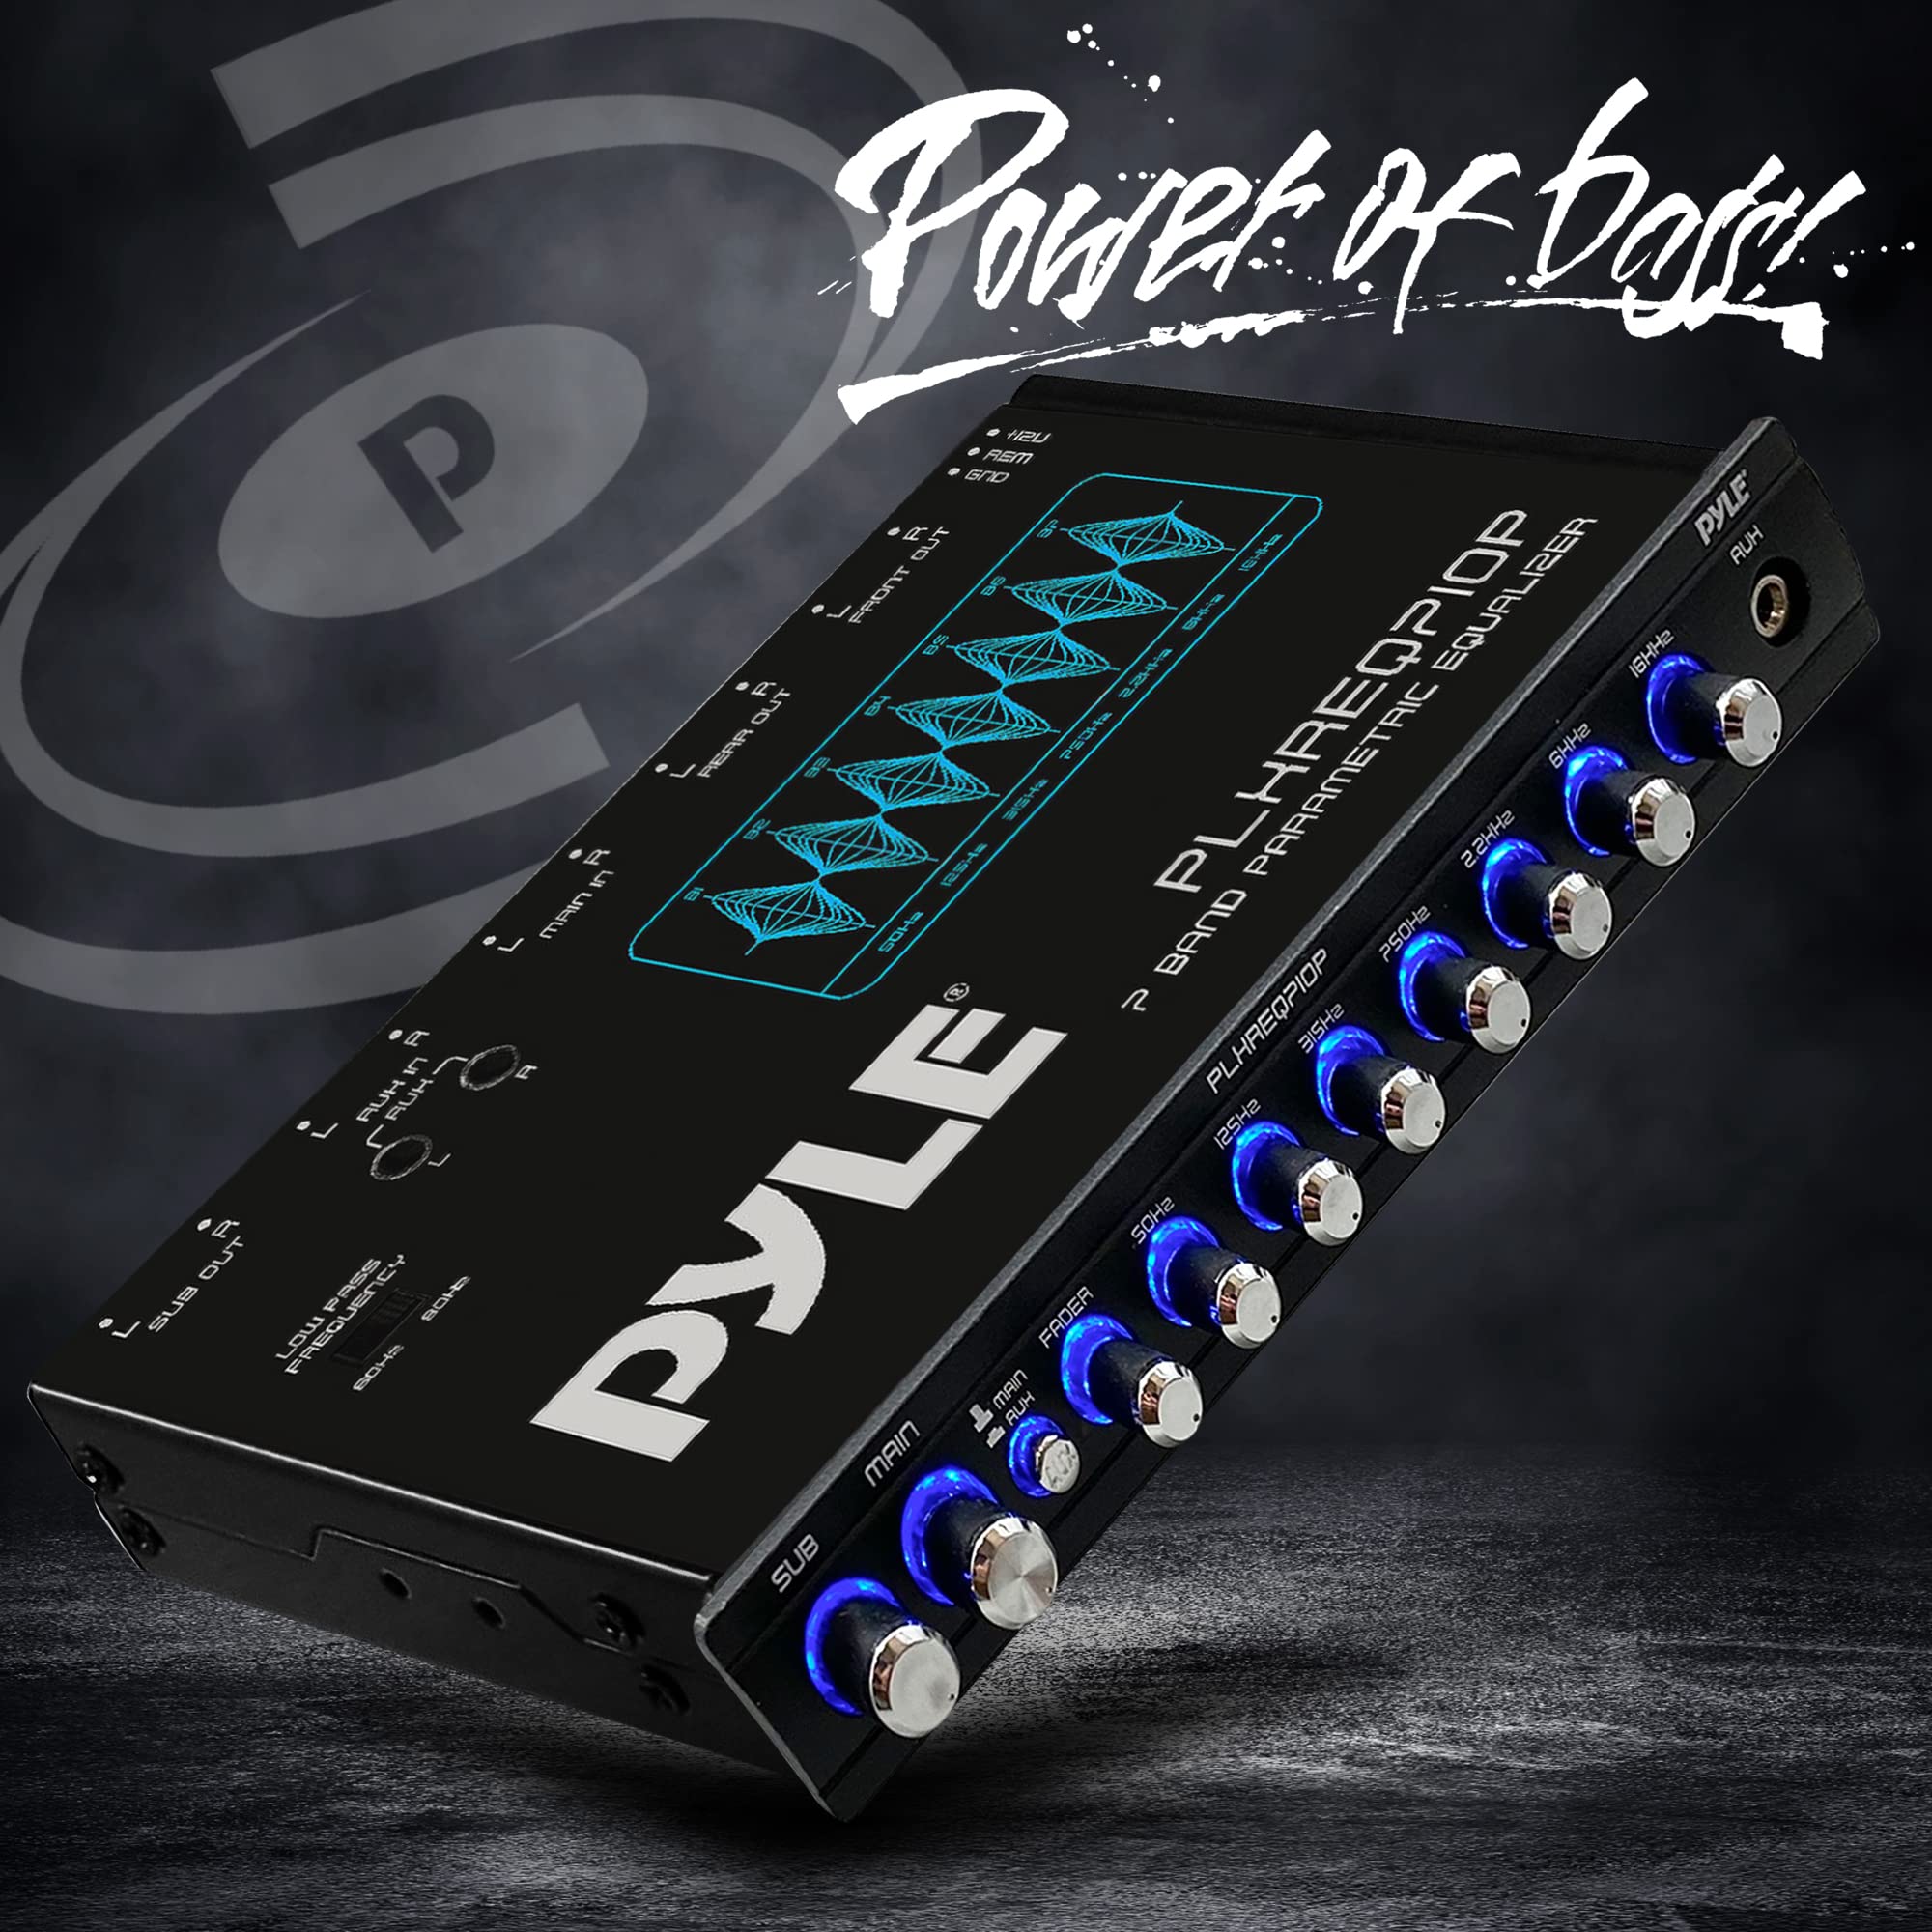 Pyle 7 Band Parametric Equalizer - 7 Volt RMS Pre-Amp Output with Subwoofer Gain Control, and 3 Input Sources Selectable, Blue Light Illumination